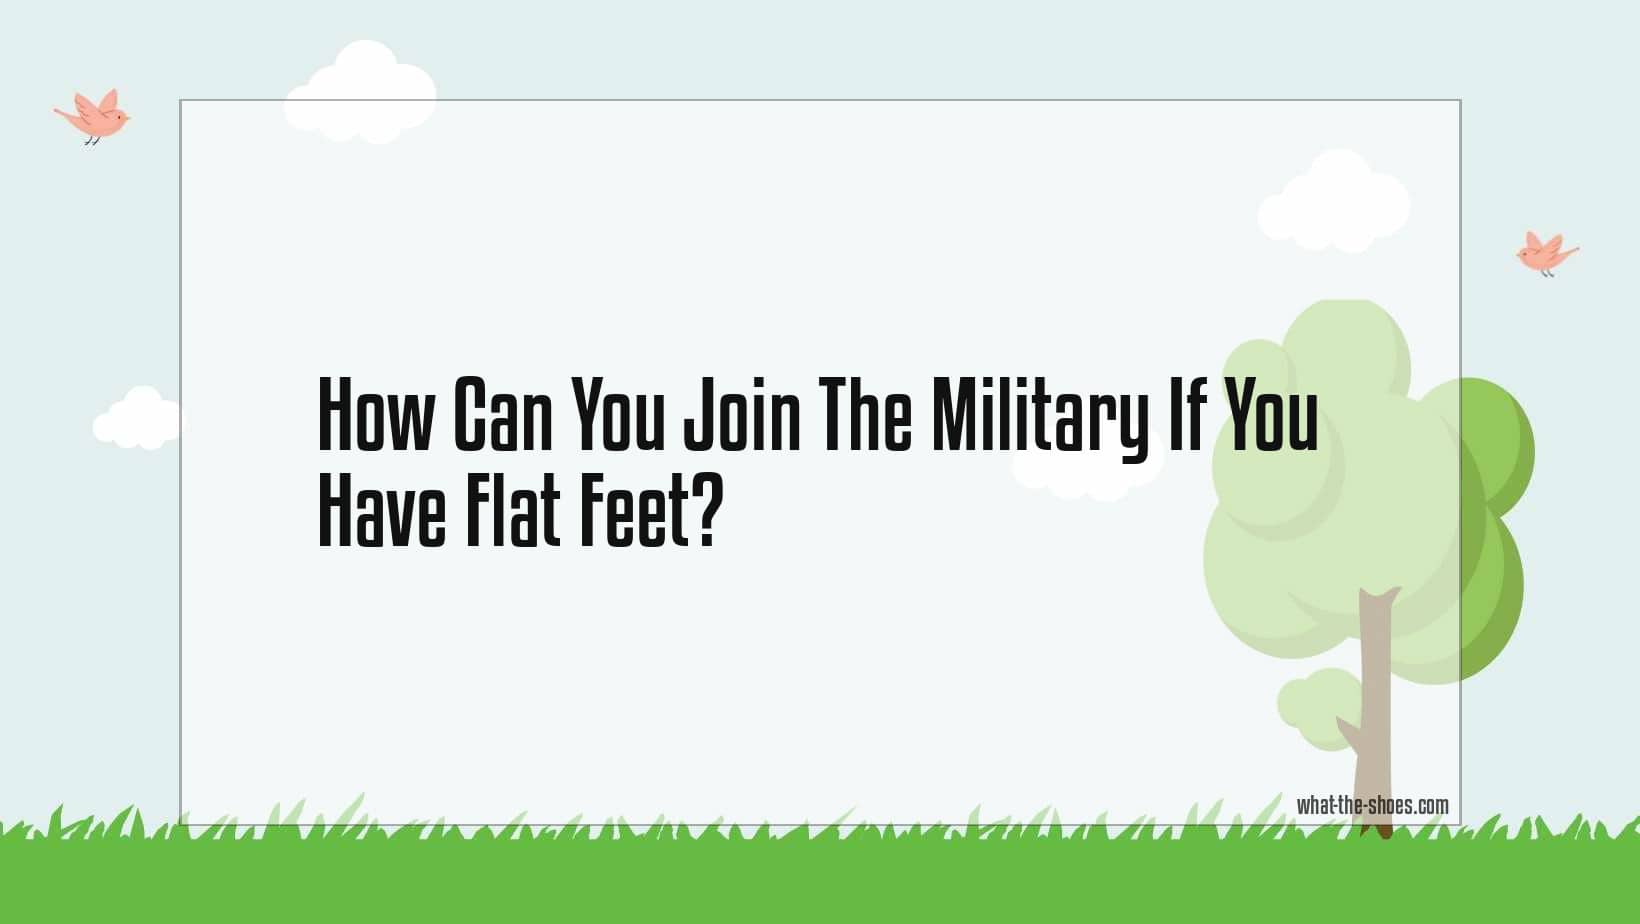 Can You Join The Military If You Have Flat Feet? Know True